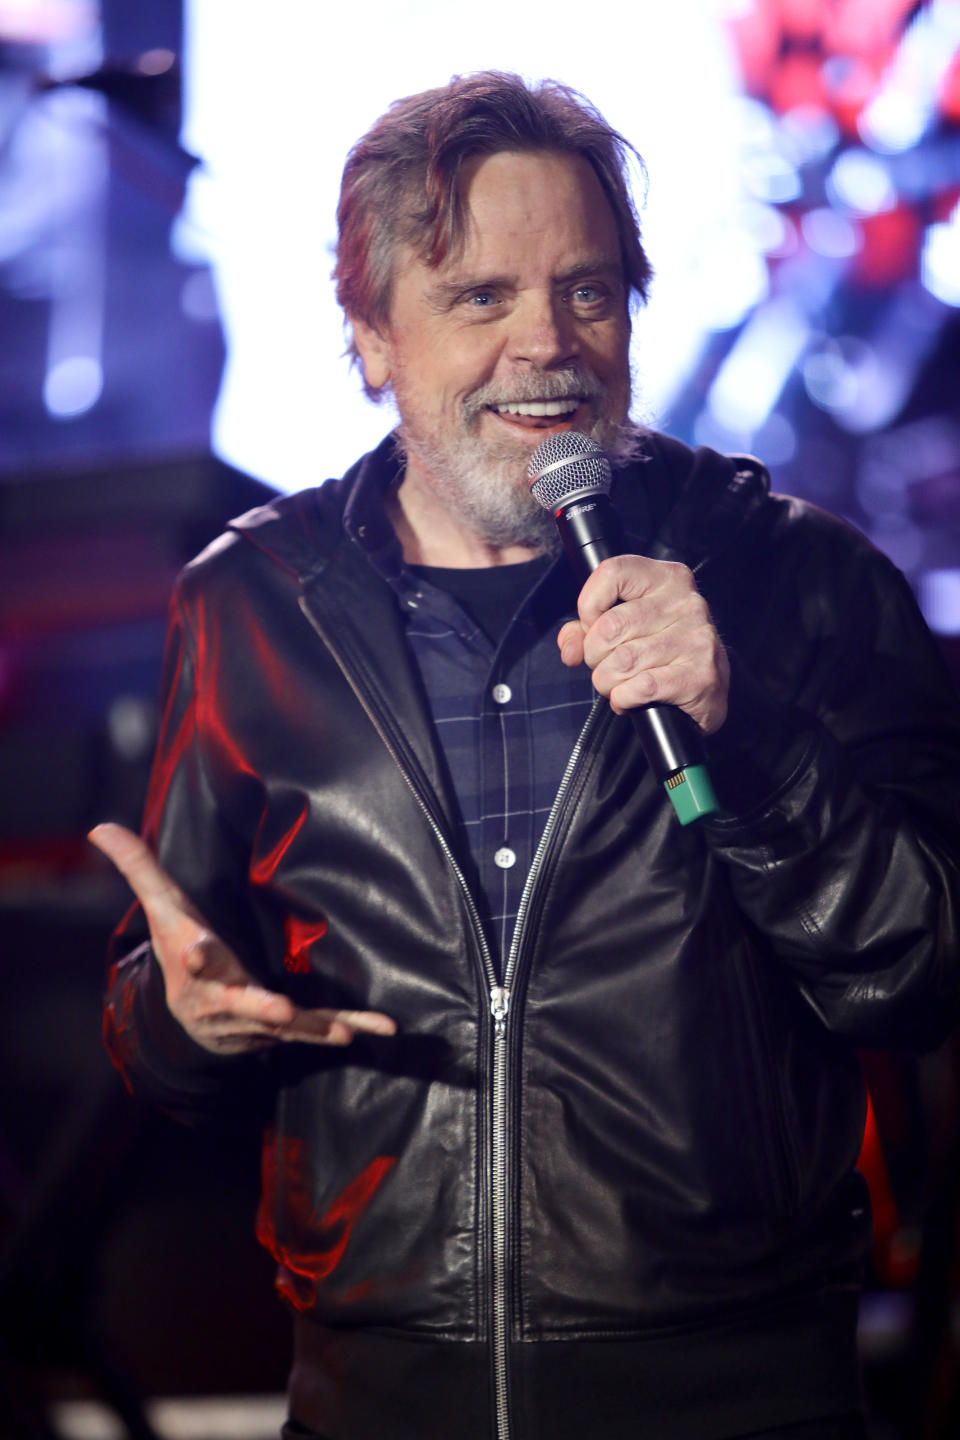 Mark talking animatedly into a microphone, wearing a black zipped up leather jacket over a dark plaid shirt